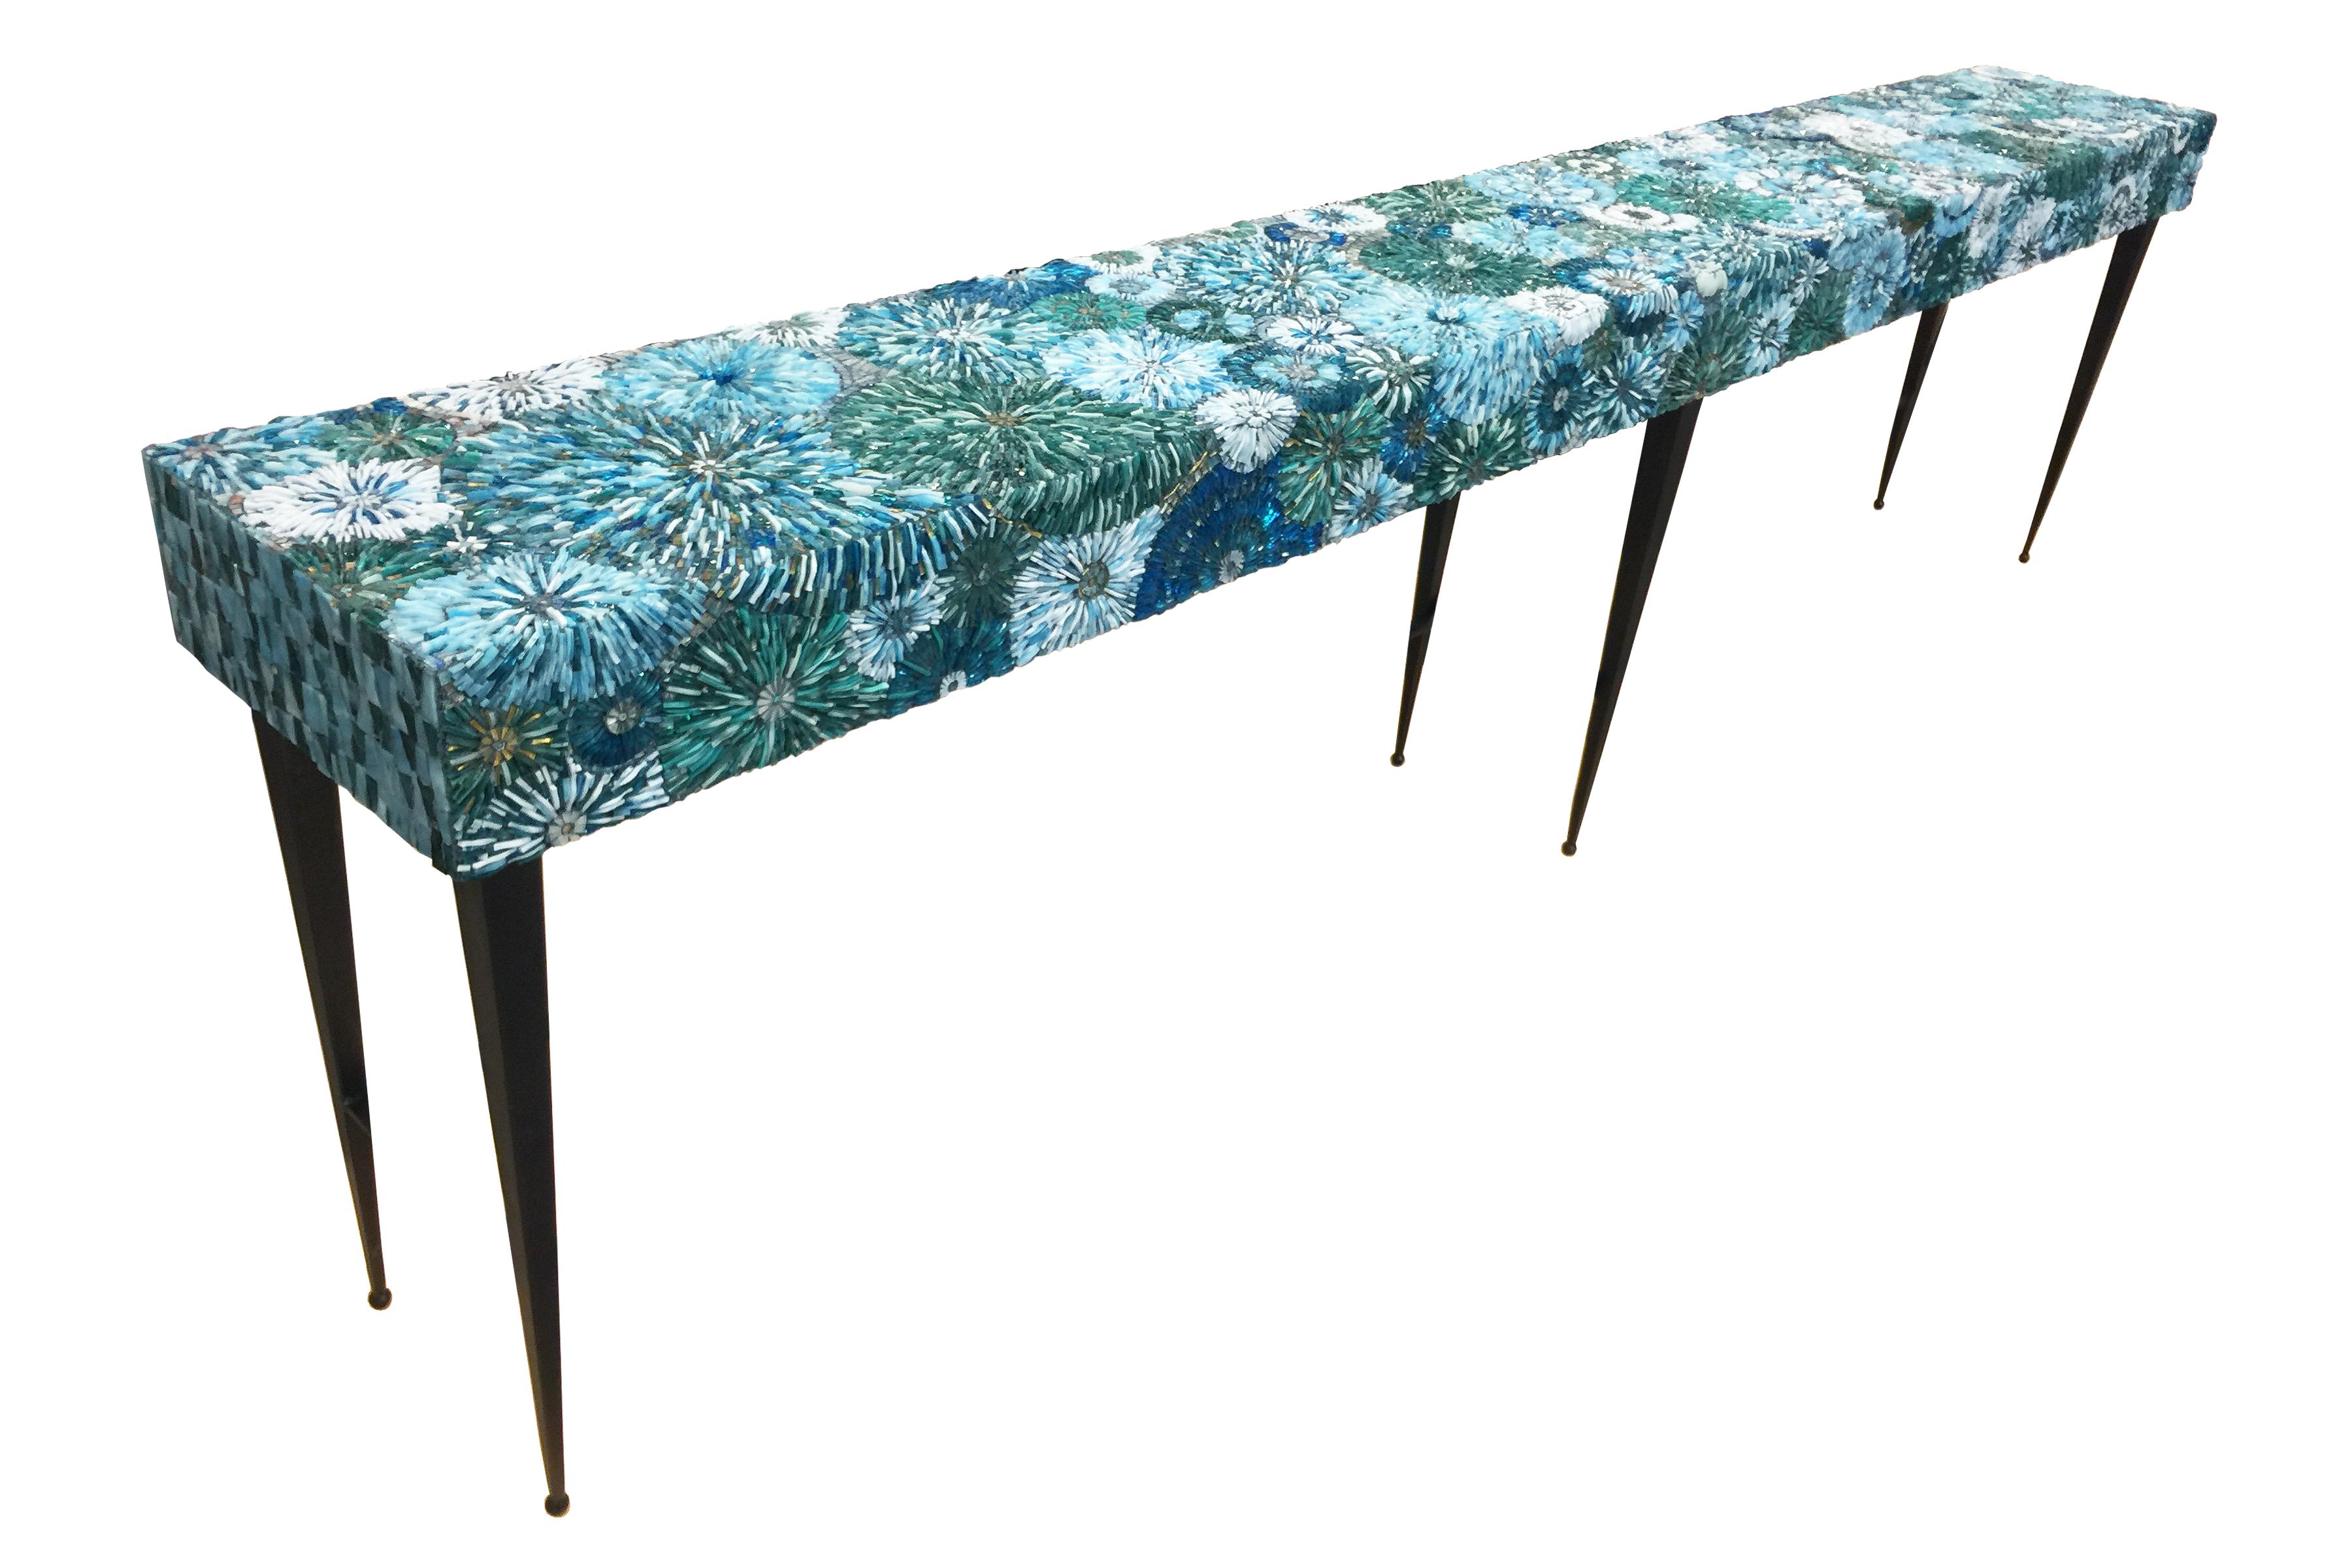 The pavia blossom console by Ercole Home has a 3-dimensional flower mosaic top with metal base.
Handcut glass mosaic in variety shades in Turquoise decorate the surface in Blossom pattern.
The metal base is in Natural Steel finish.
Custom sizes